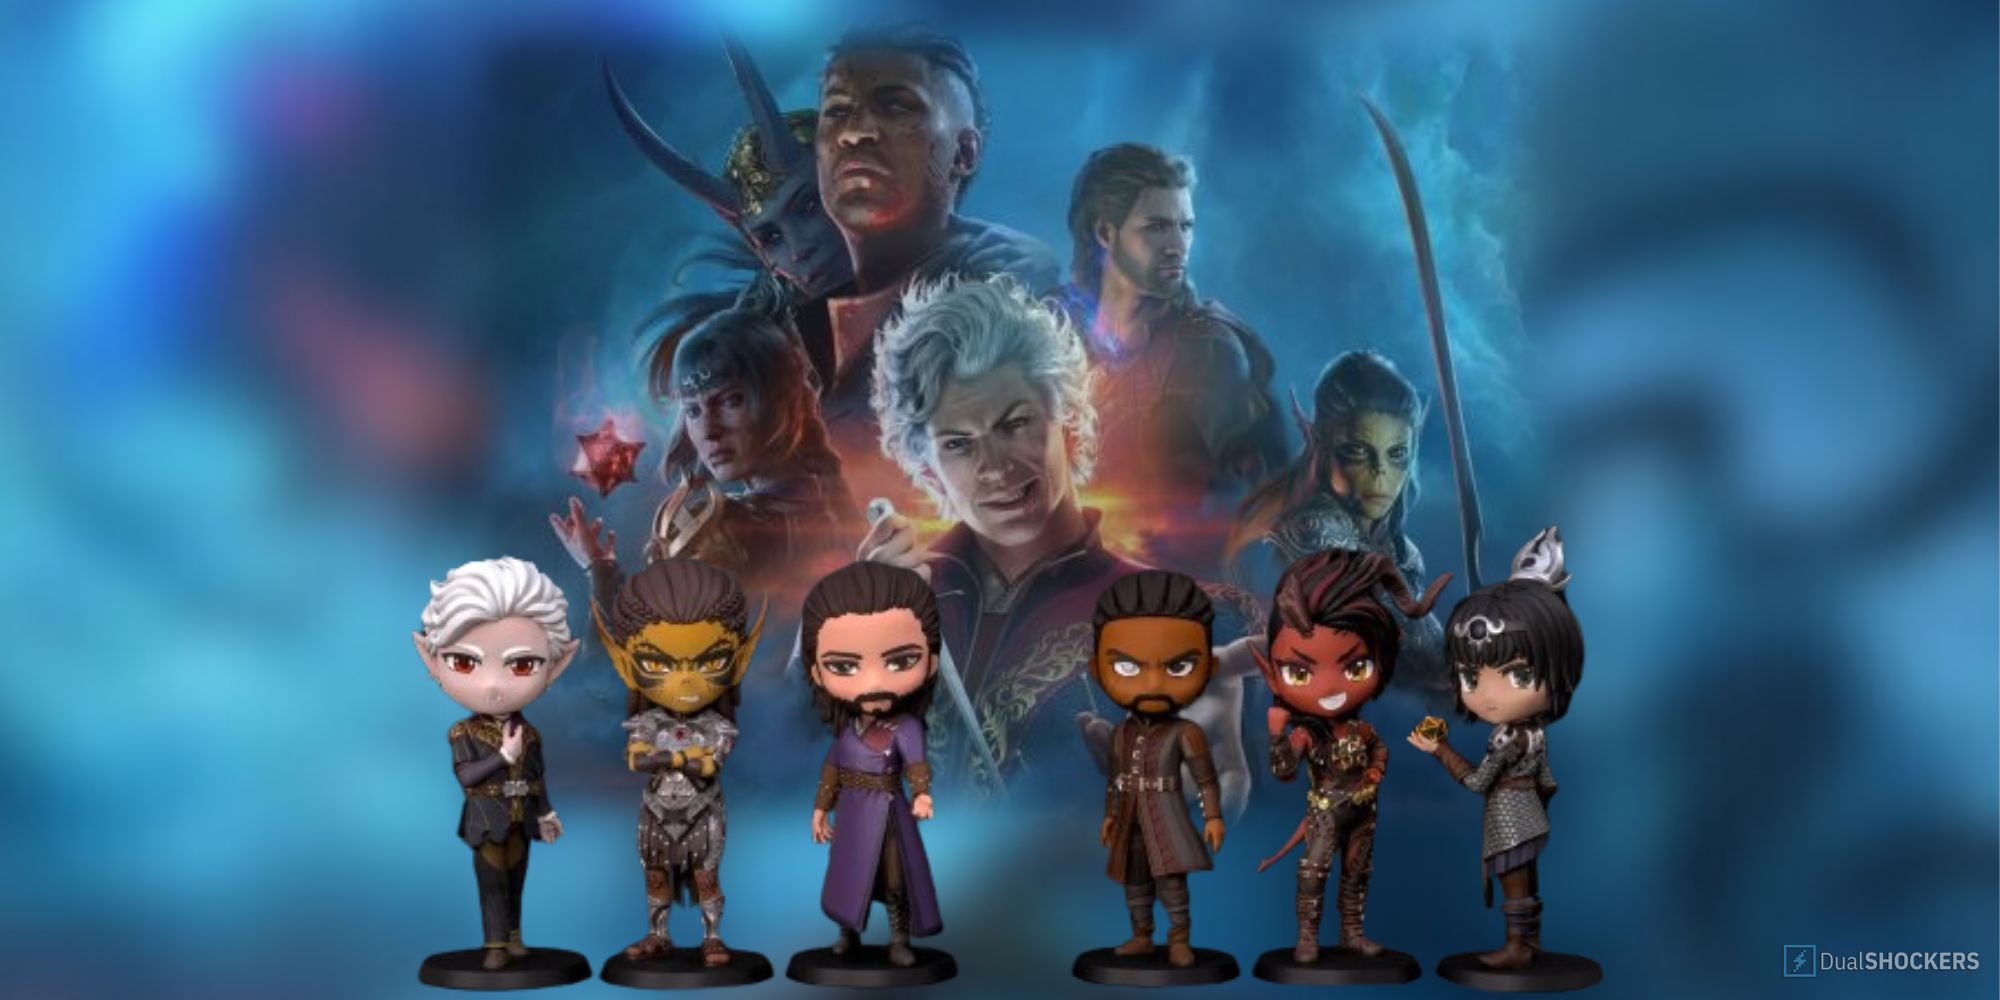 Feature image with chibi Baldur's Gate 3 characters in front of a faded image of the characters from the game.